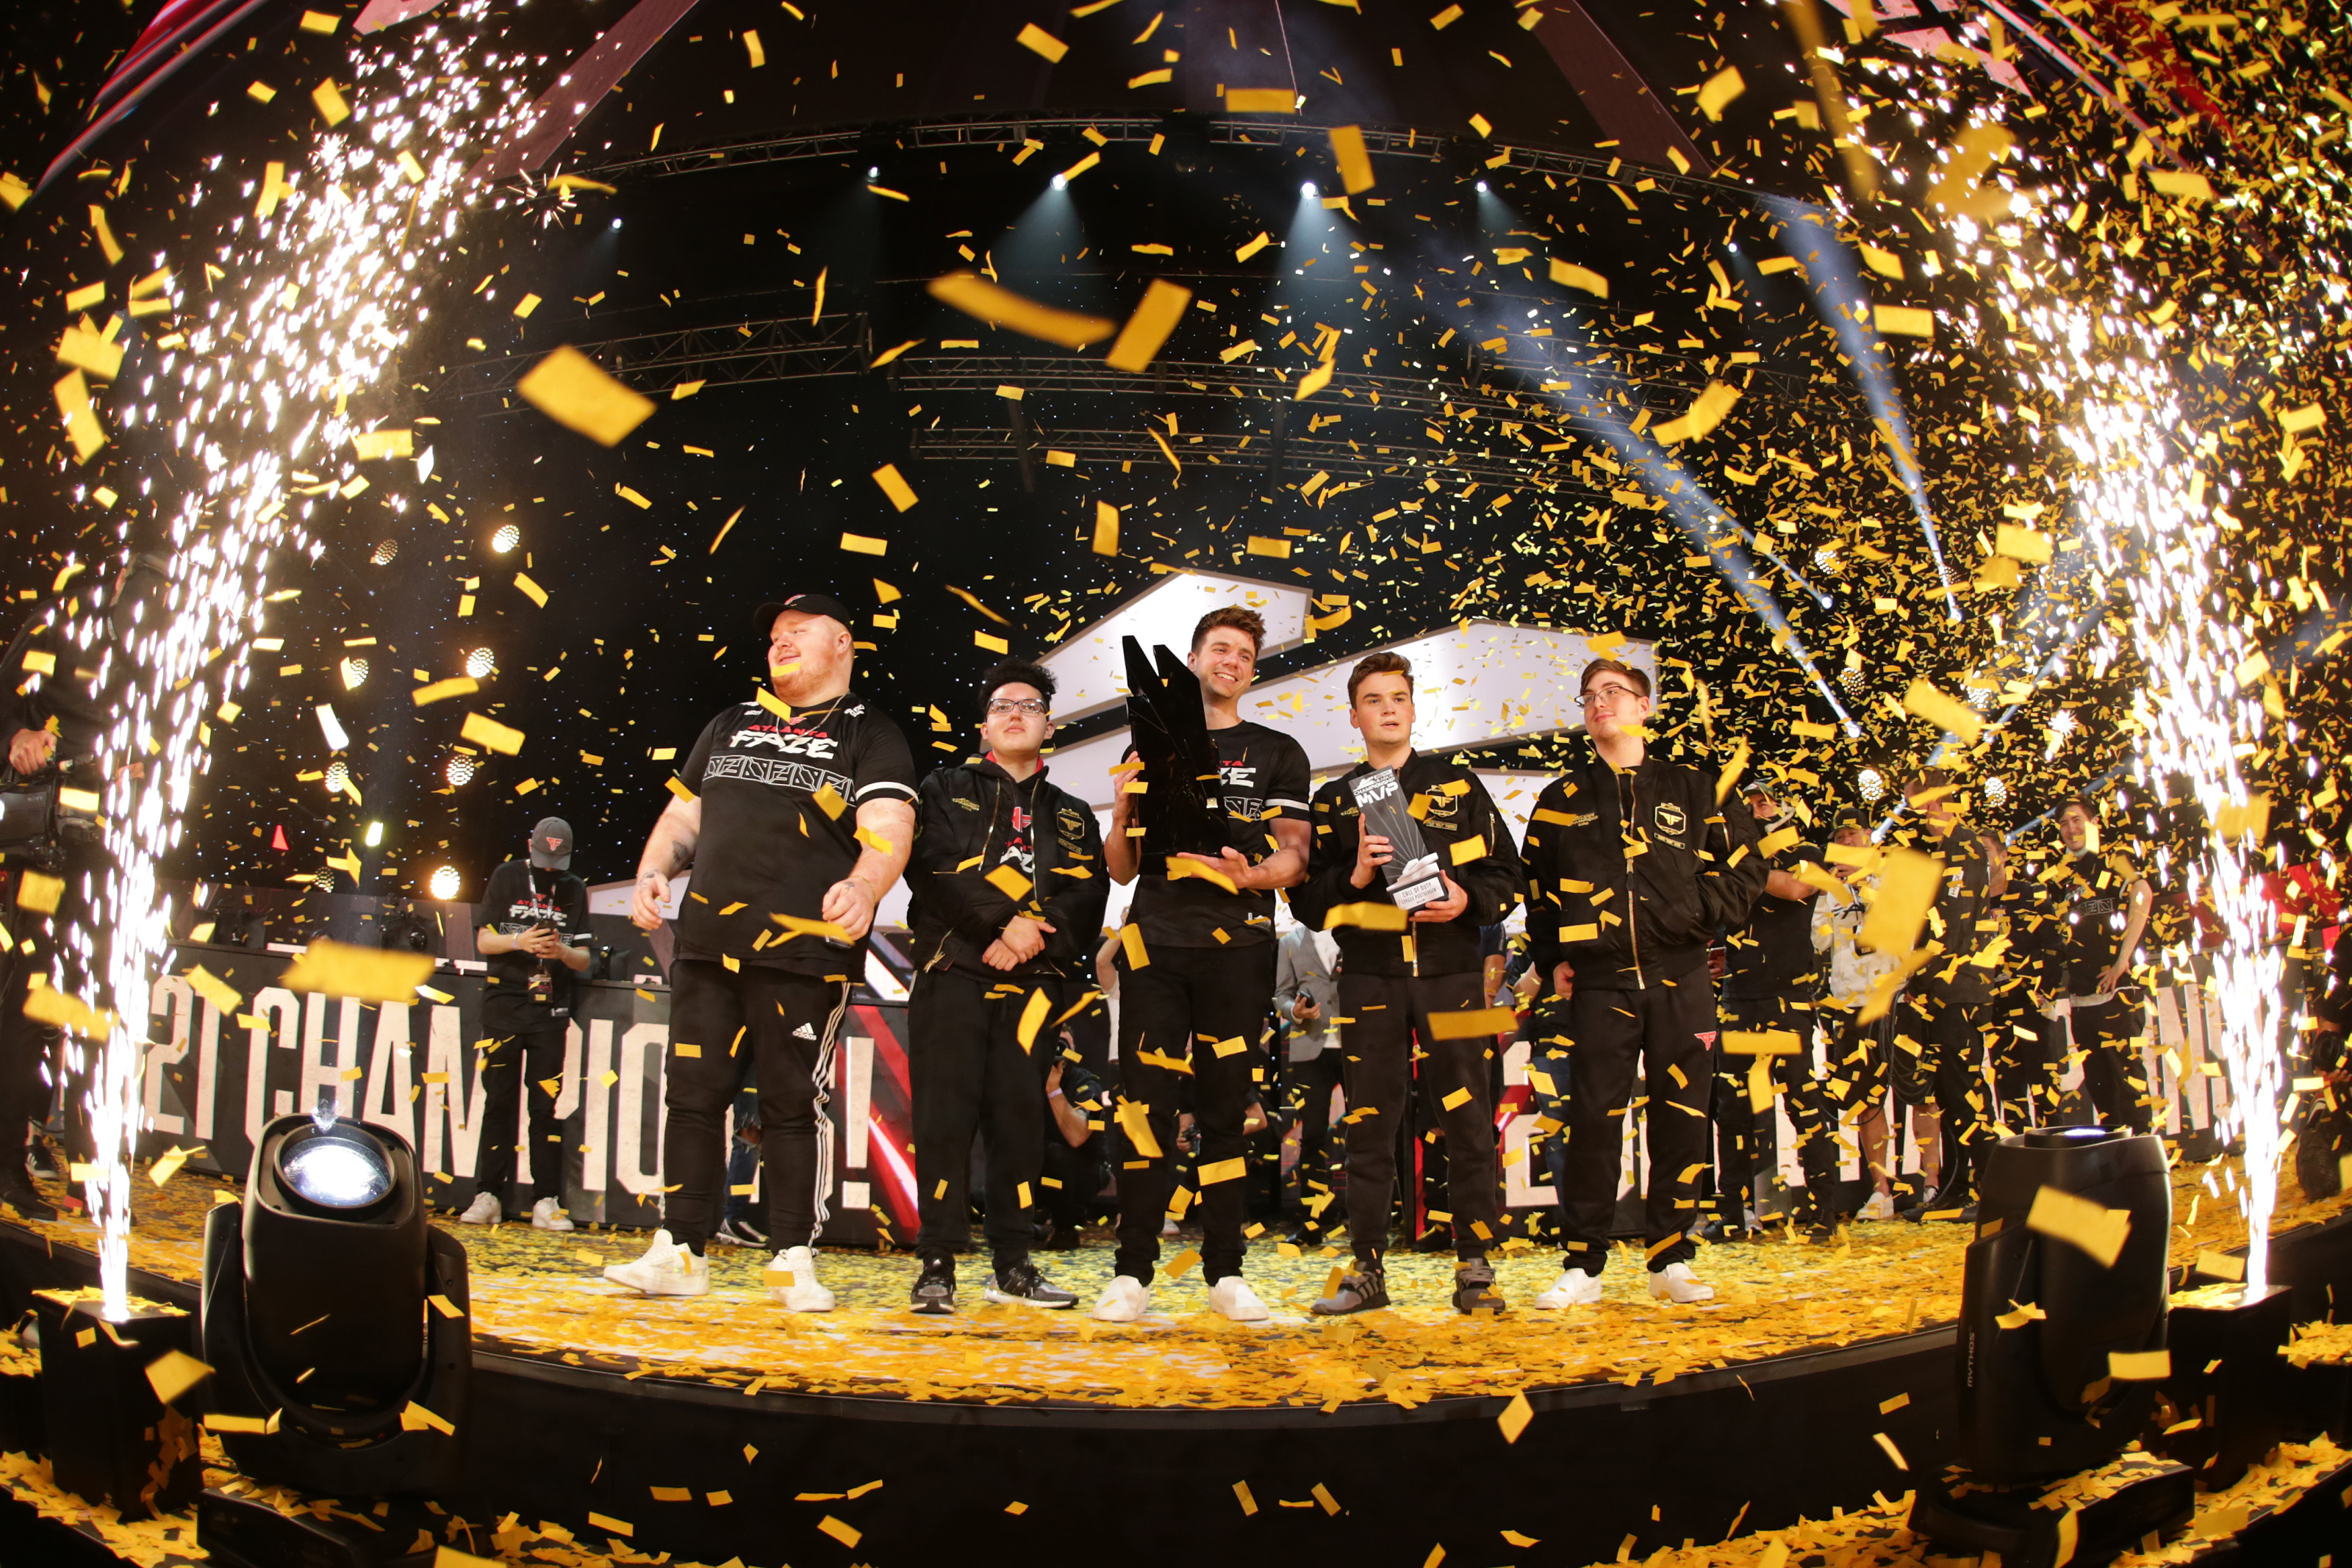 Call of Duty League Championship 2023 has exciting details